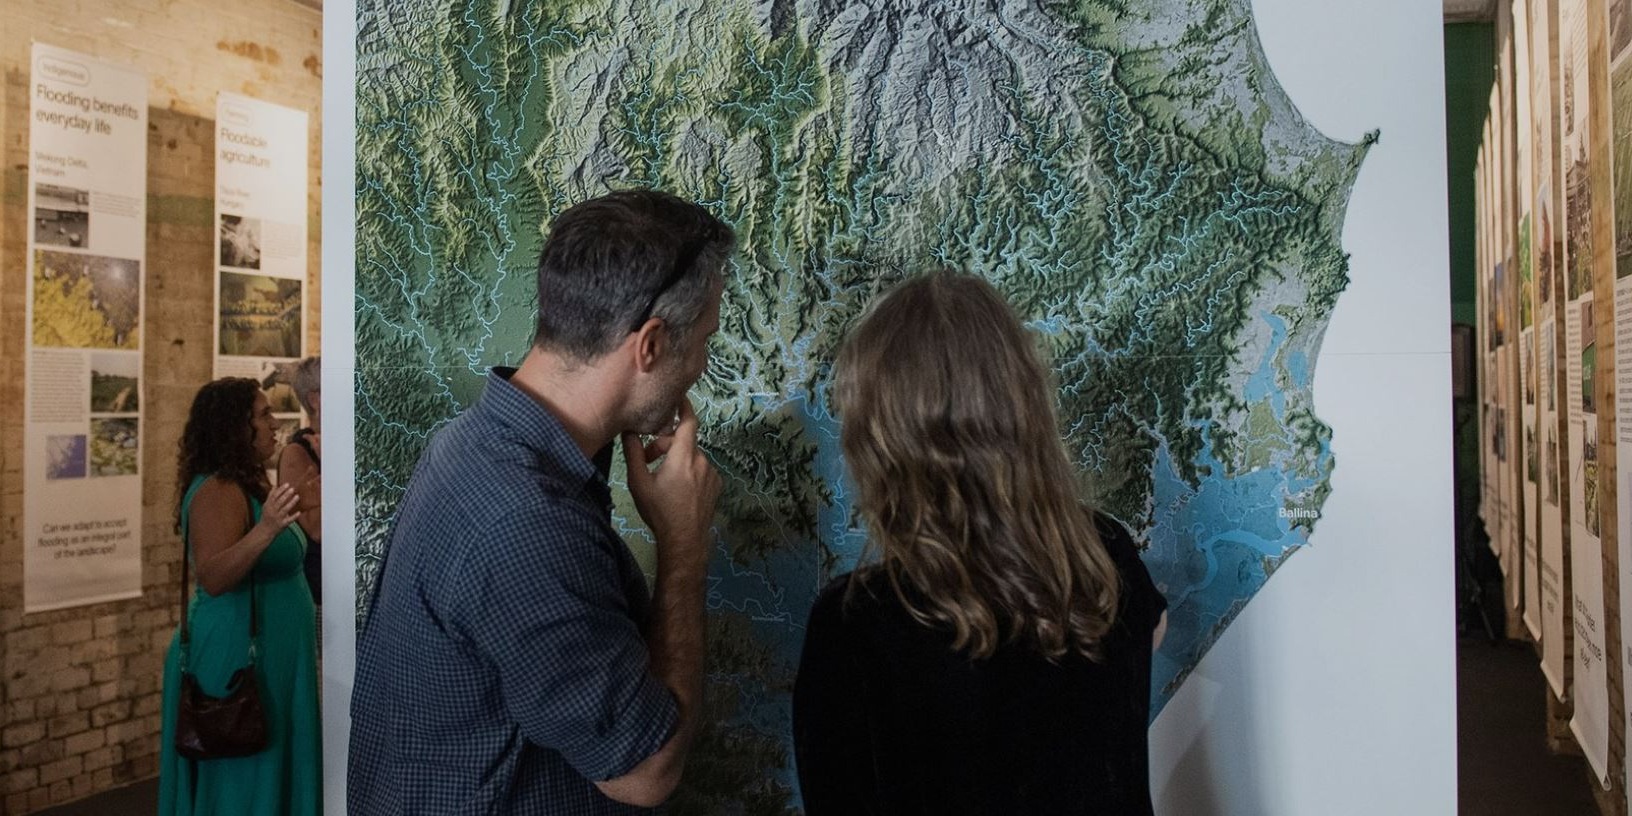 Two people looking at a topography map mounted on a wall.